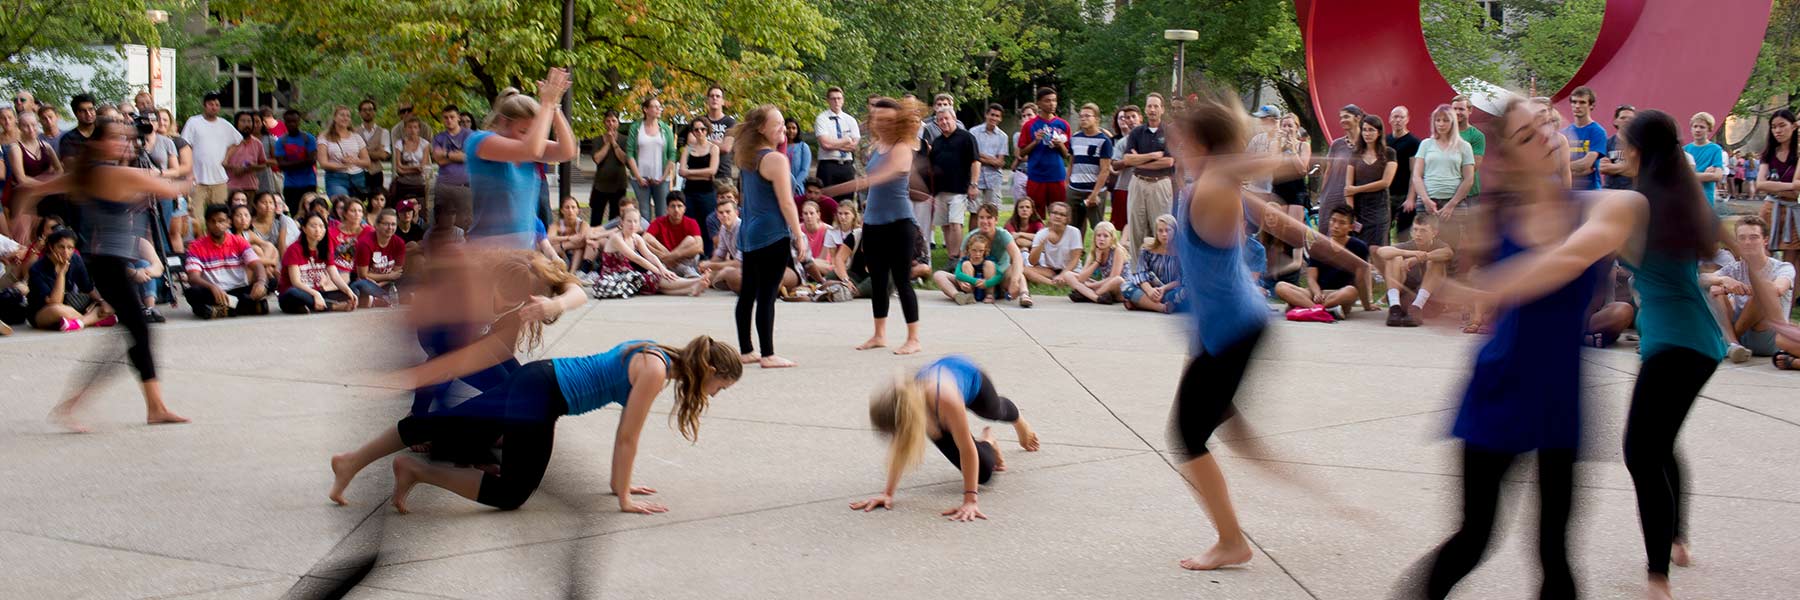 Students dancing in front of a crowd